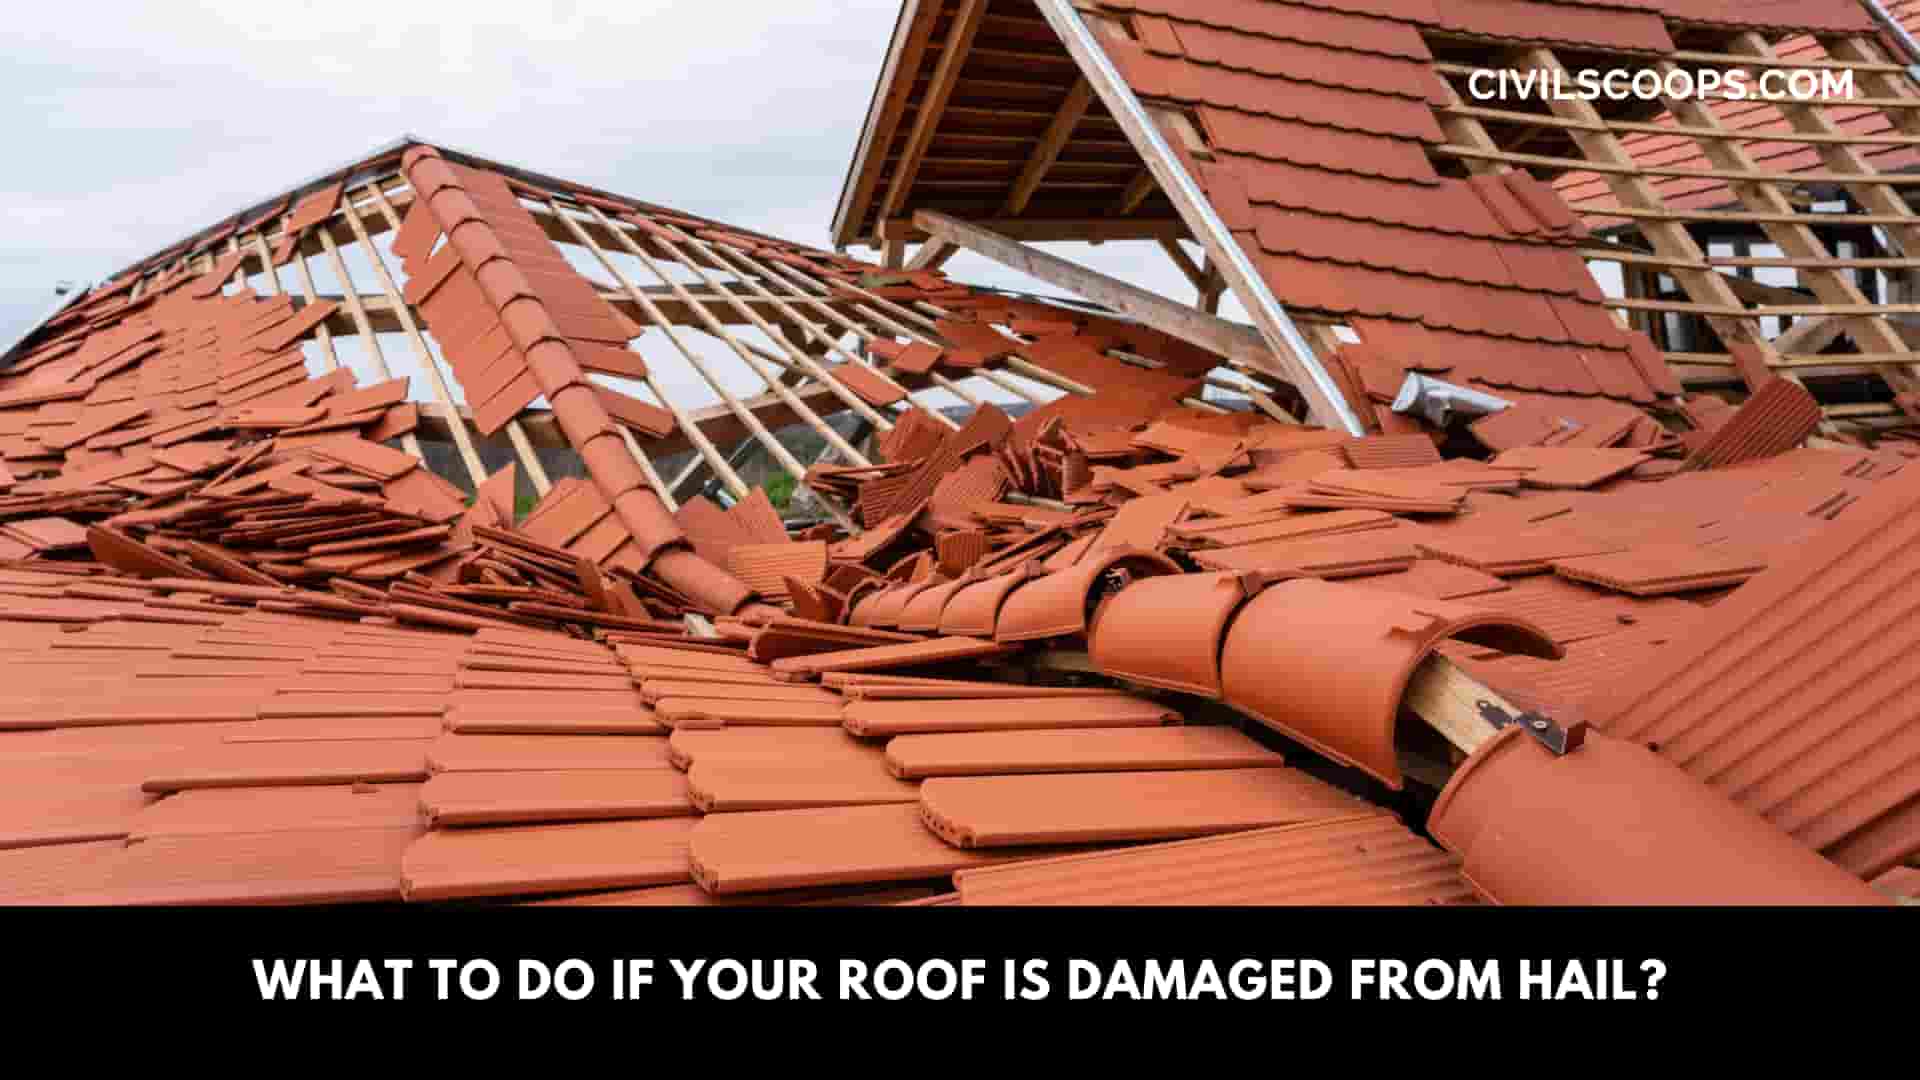 What to Do If Your Roof Is Damaged from Hail?